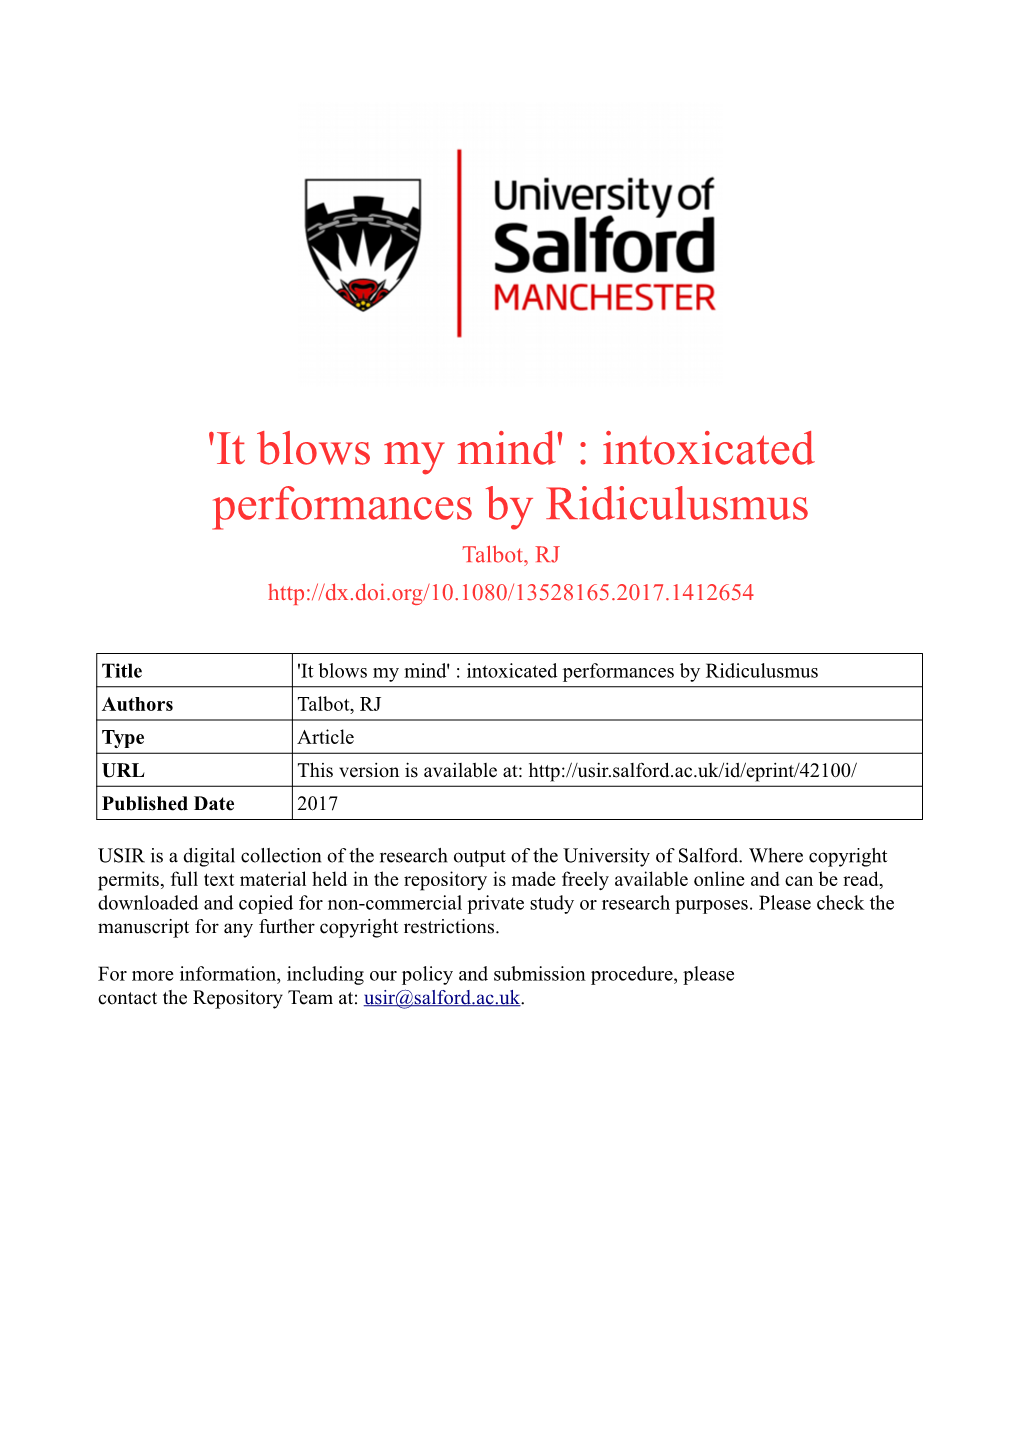 Intoxicated Performances by Ridiculusmus Talbot, RJ